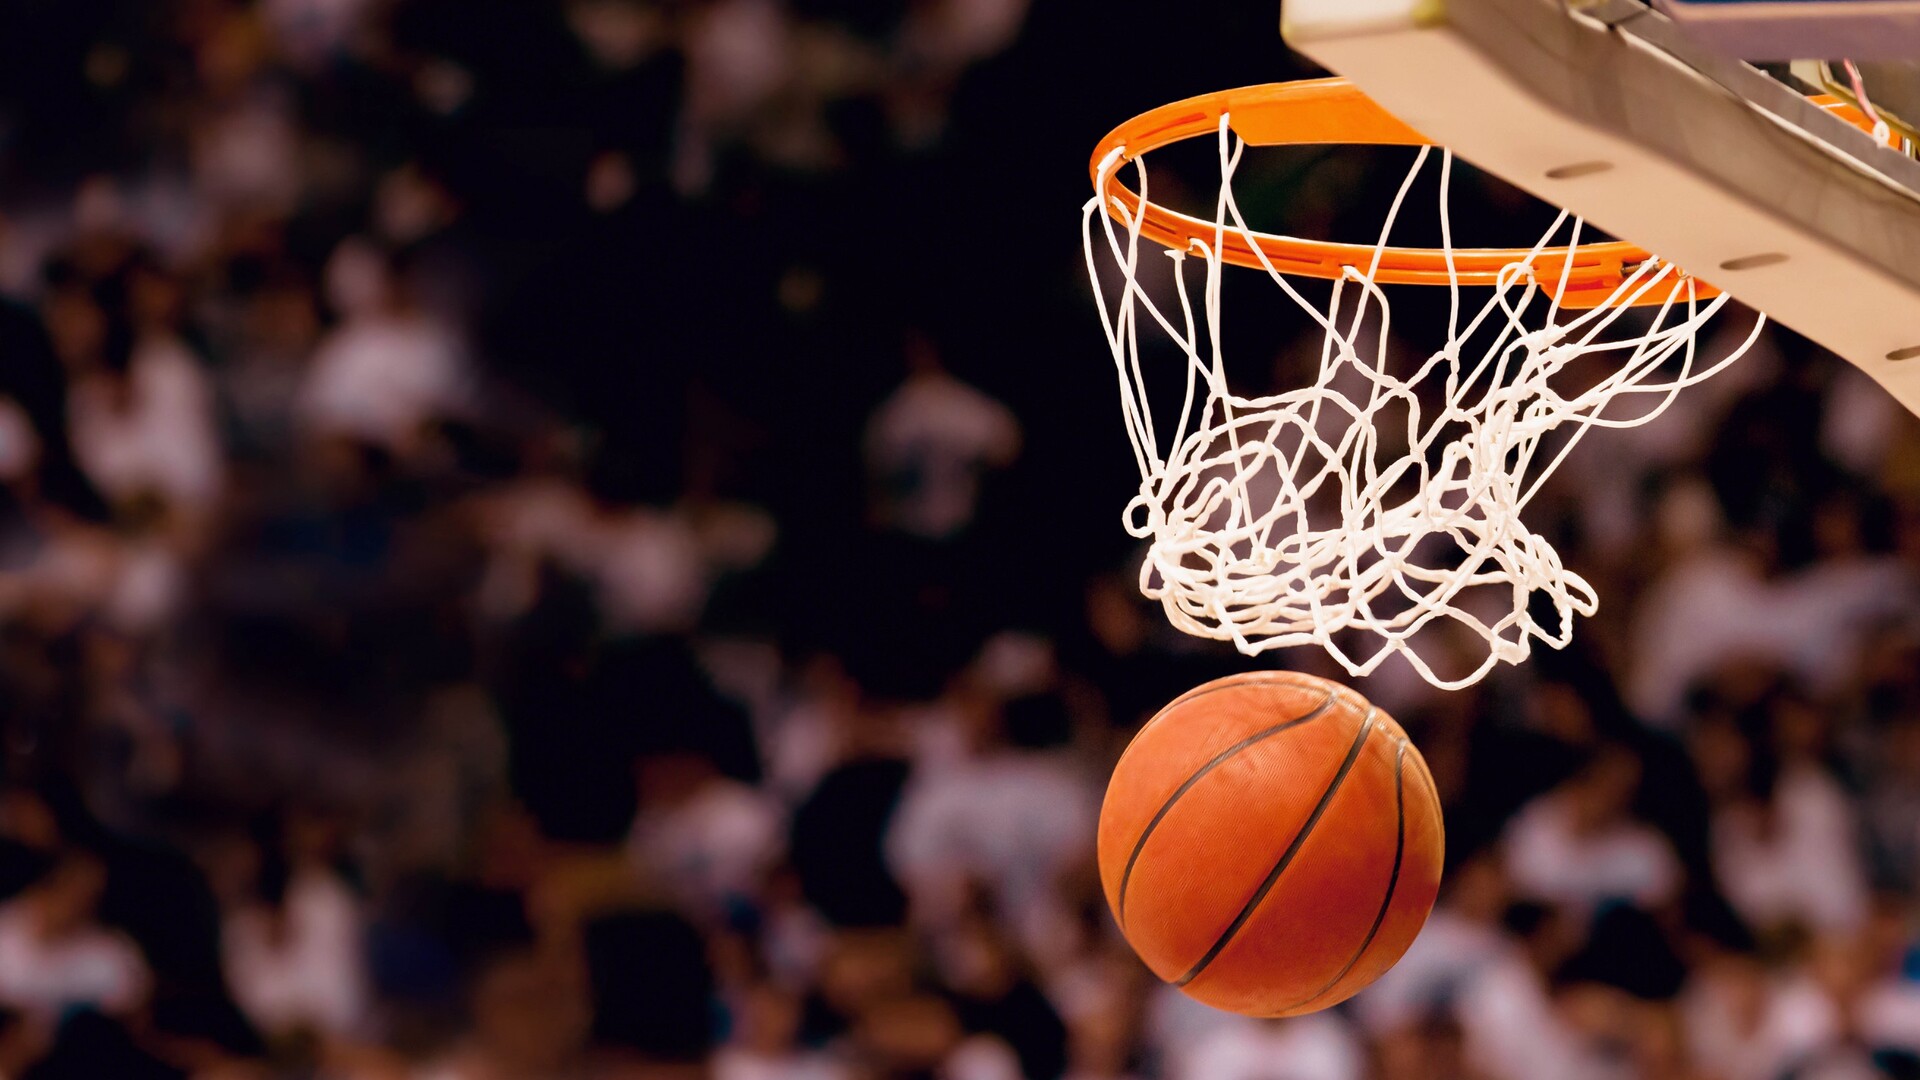 Basketball: Learn All about the sport basketball